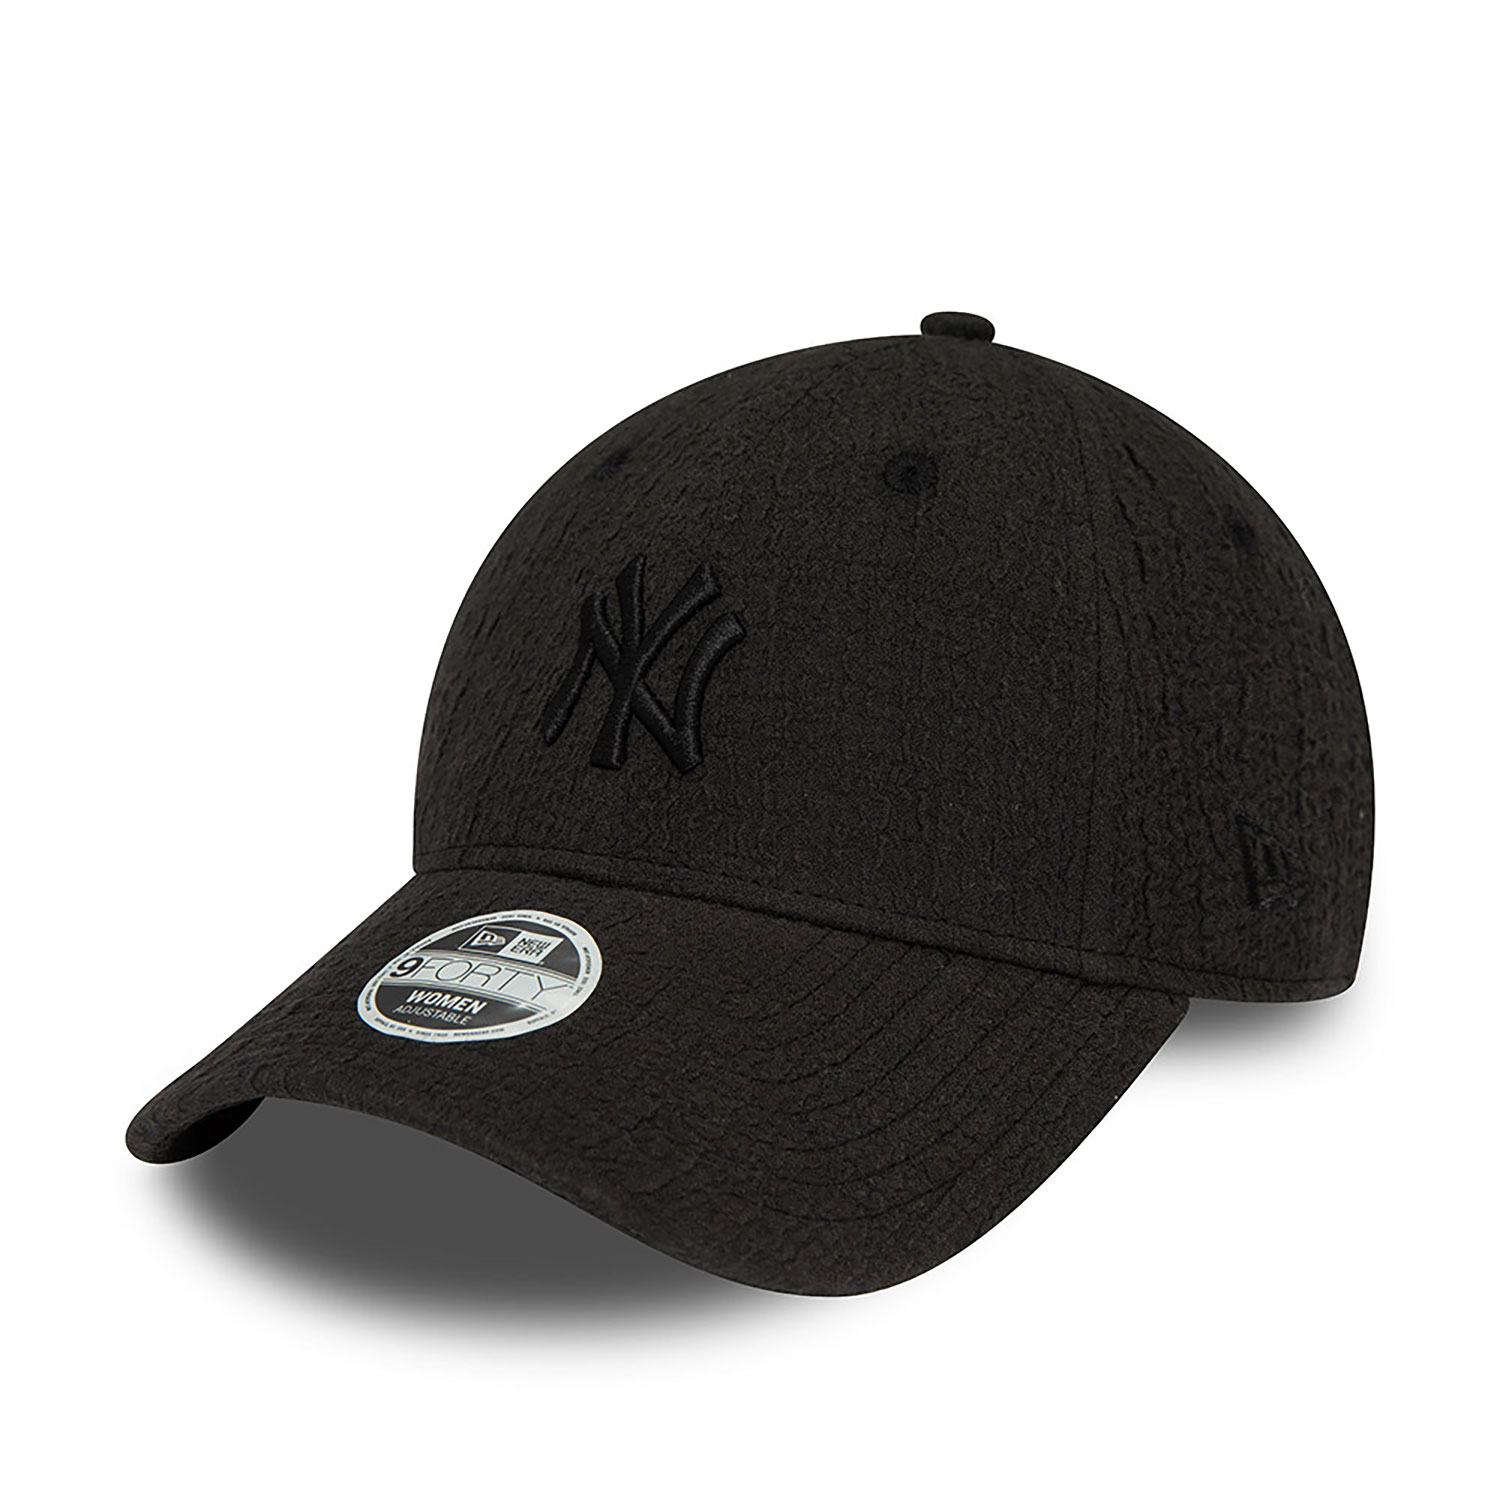 New York Yankees Womens Bubble Stitch Black 9FORTY Adjustable Cap